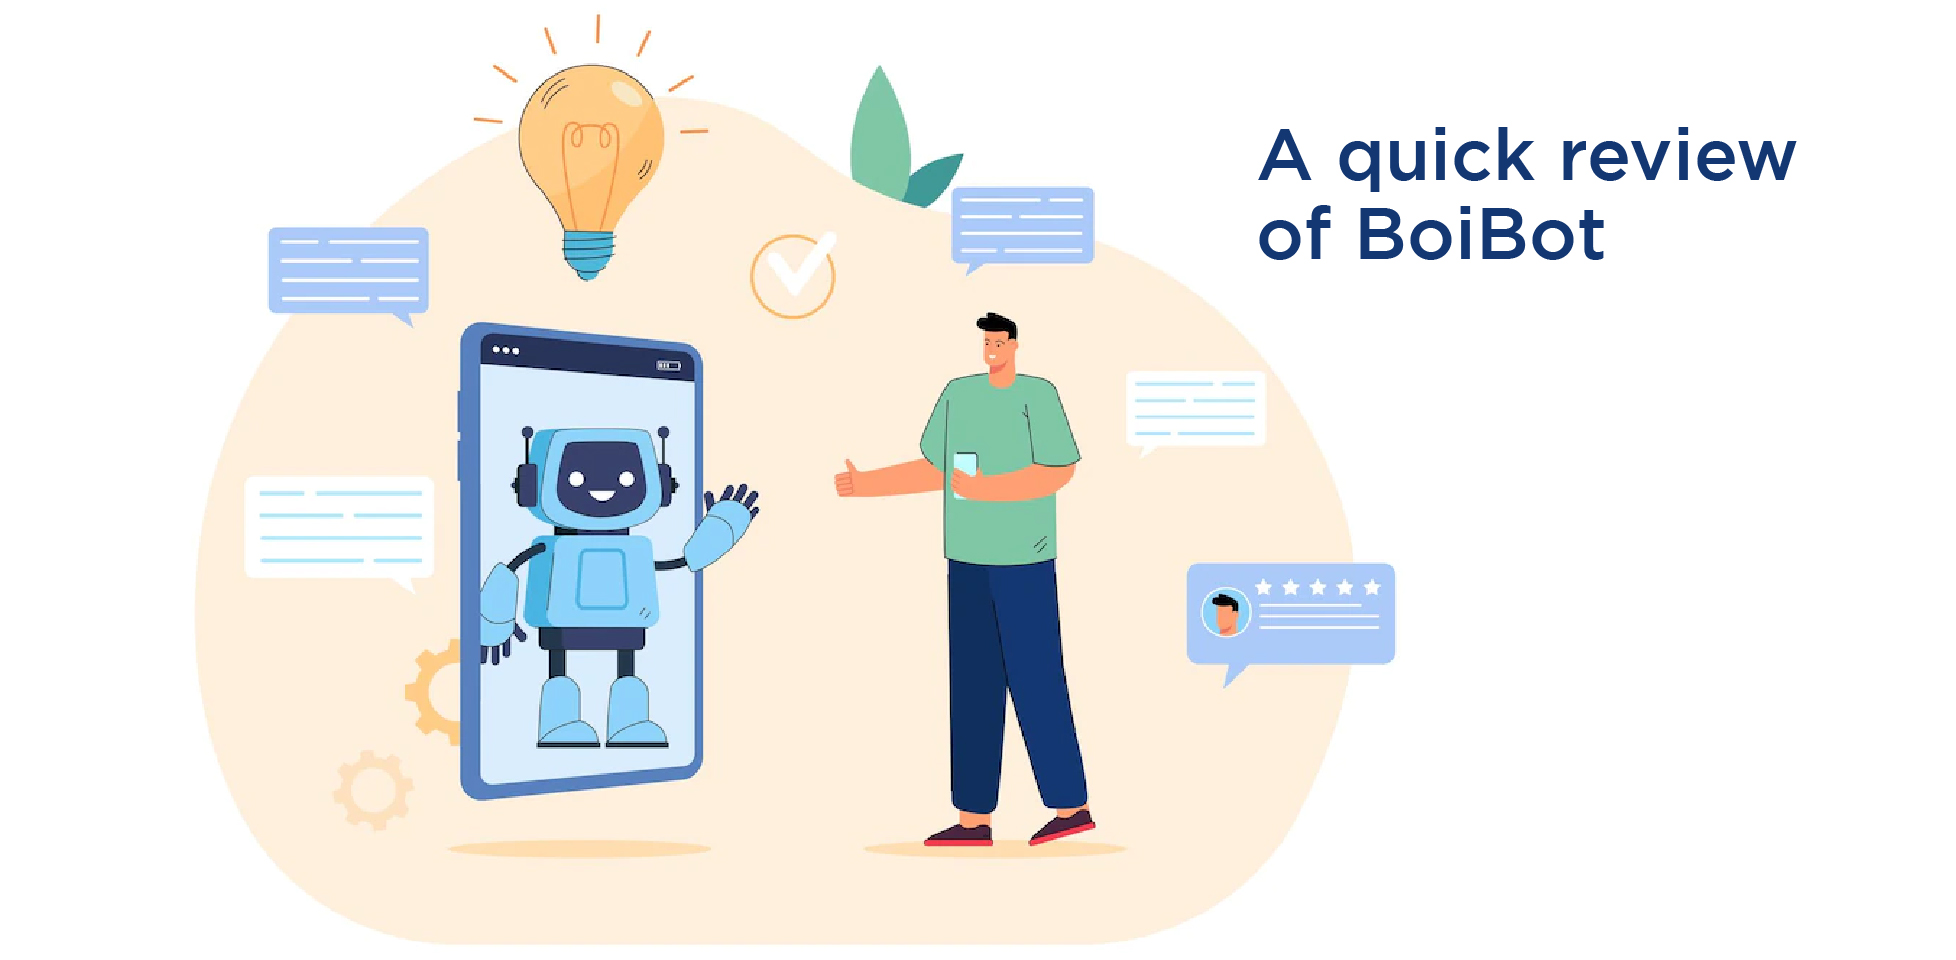 A quick review of BoiBot